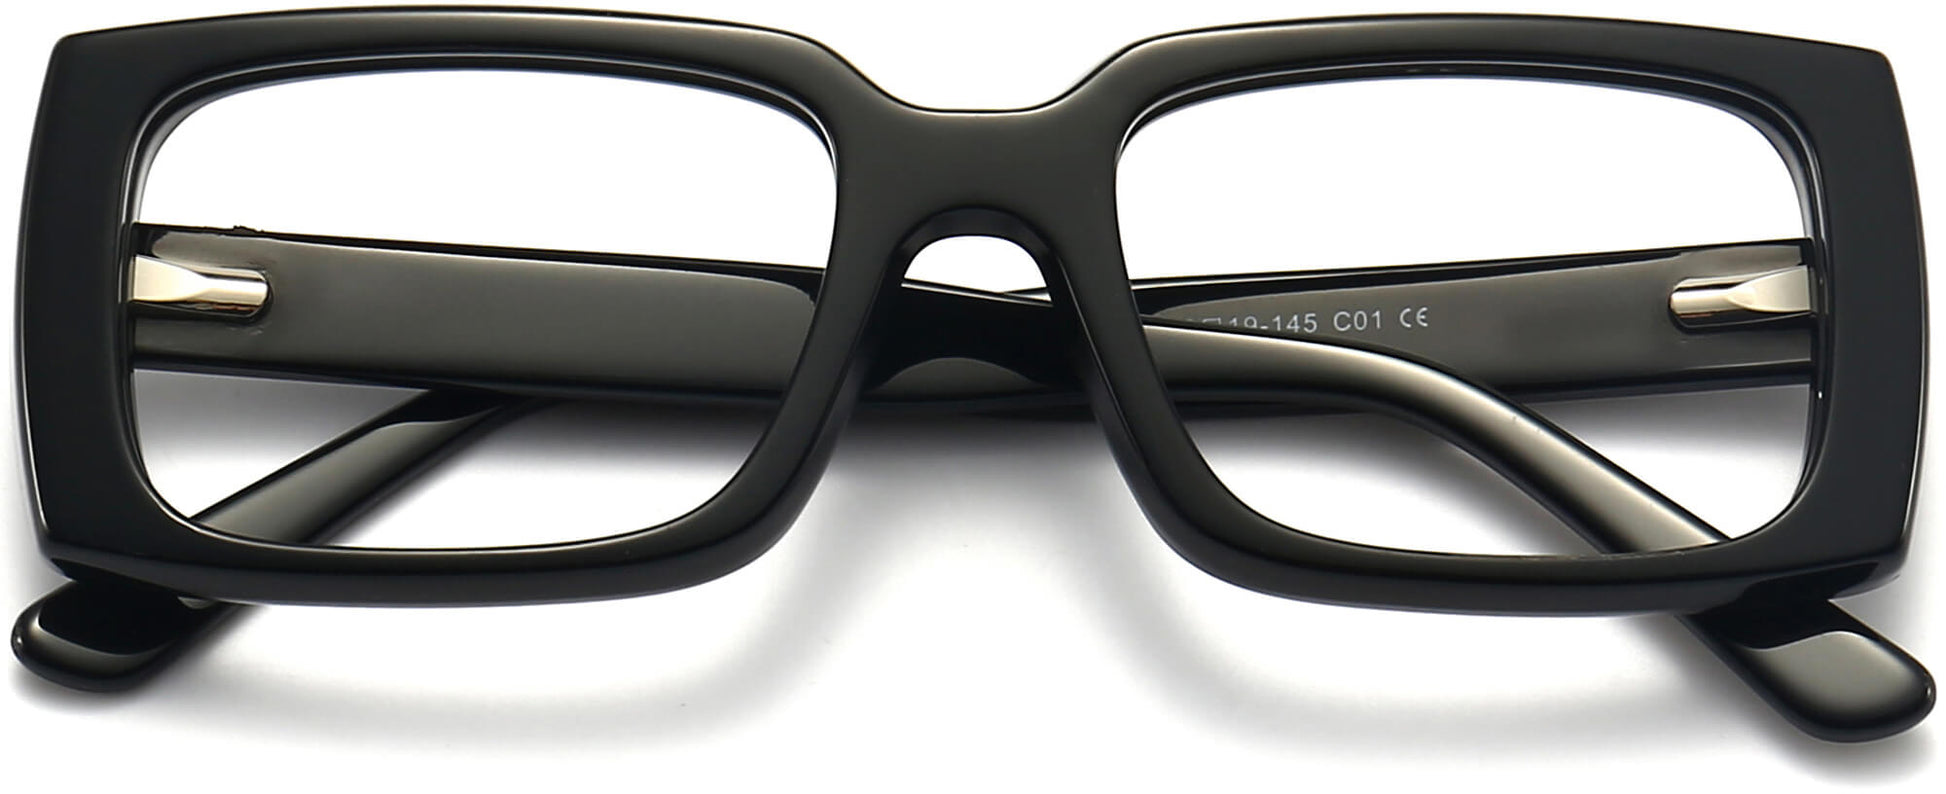 Mckinley Square Black Eyeglasses from ANRRI, closed view